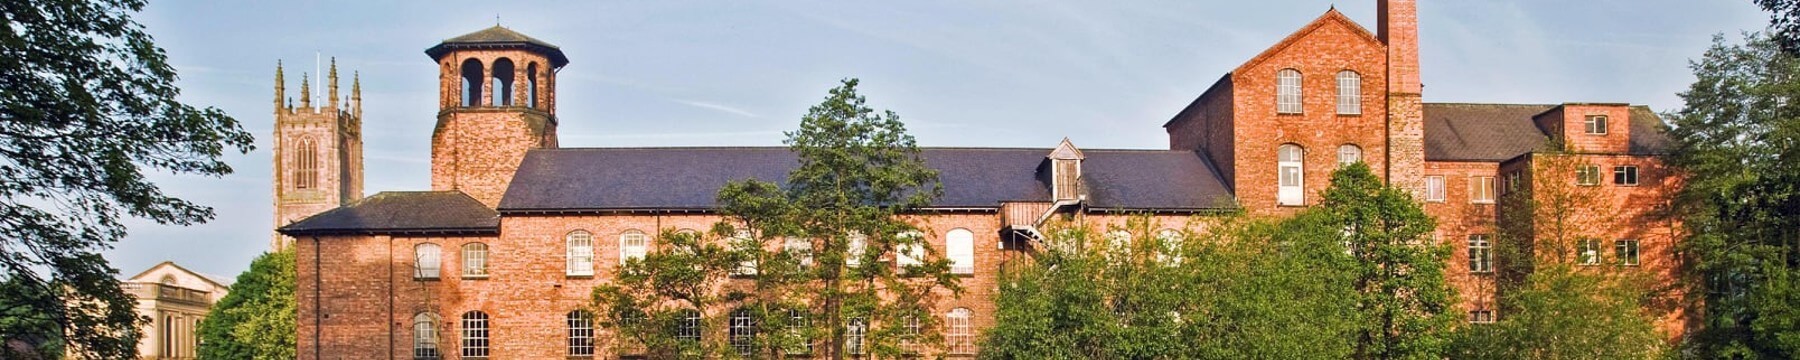 Derby Museum of Making